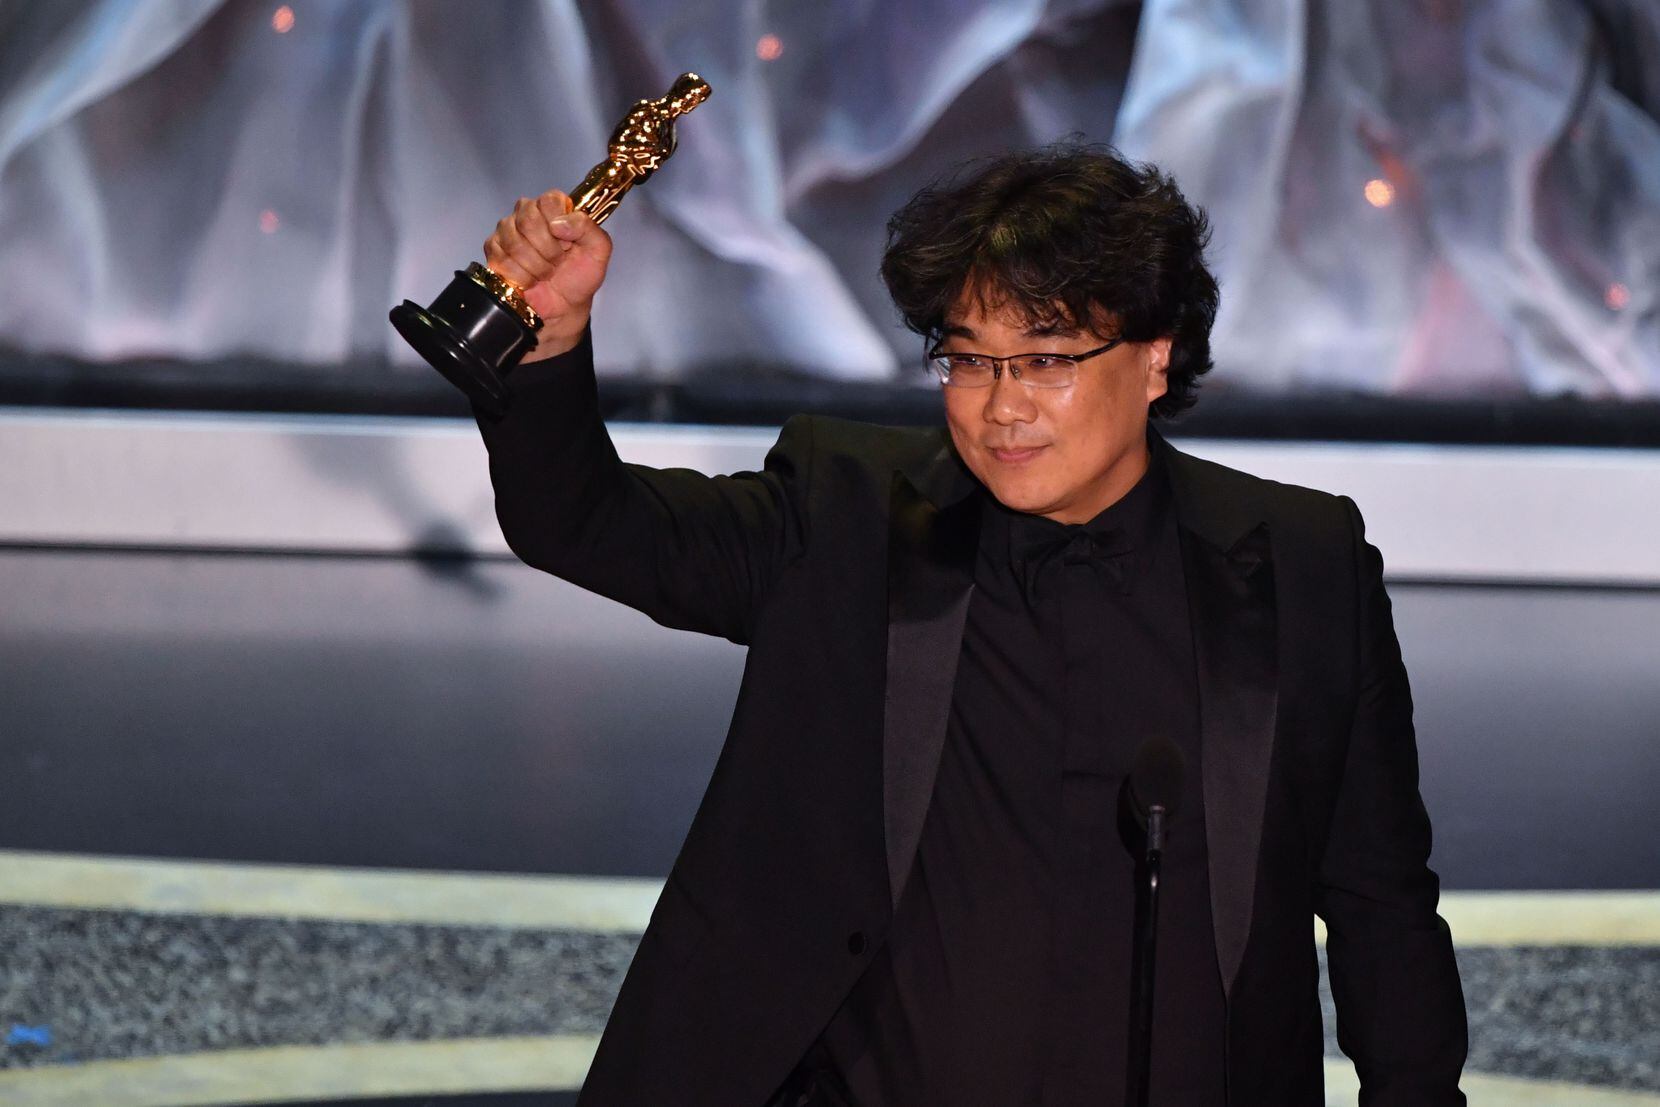 South Korean director Bong Joon-ho accepts the award for Best International Feature Film for "Parasite" during the 92nd Oscars at the Dolby Theatre in Hollywood, California on Feb. 9, 2020.